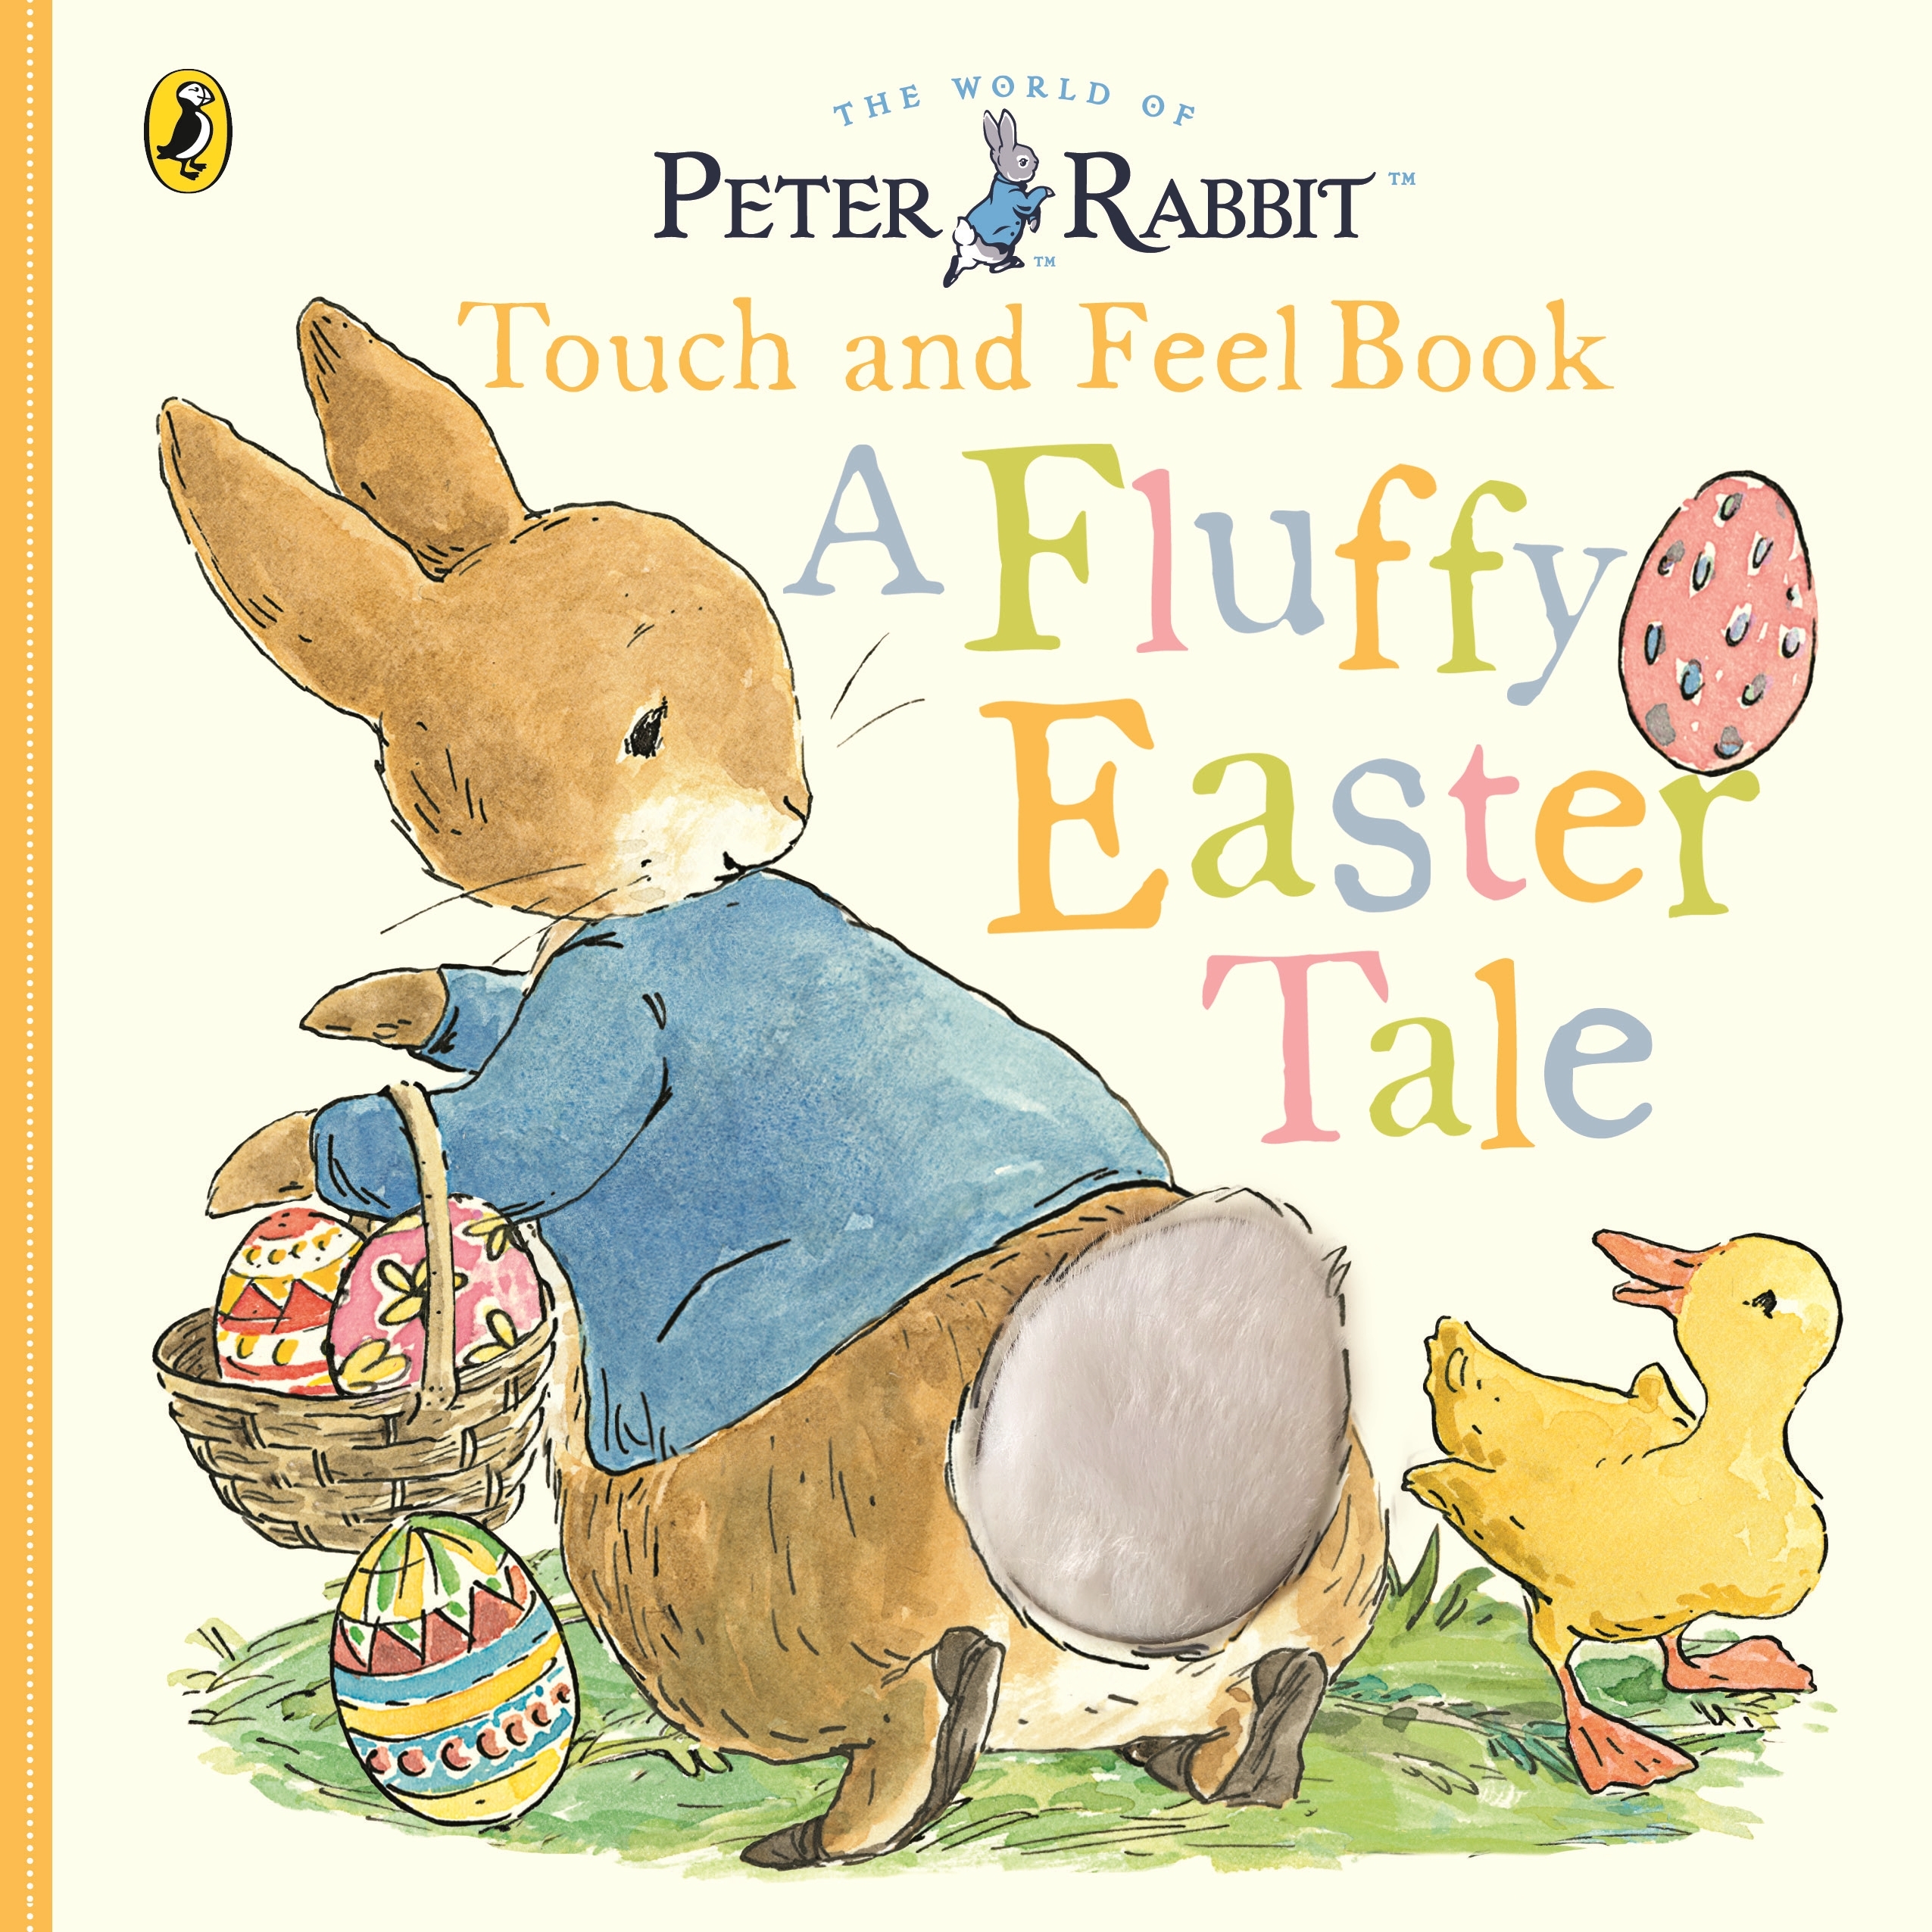 Peter Rabbit A Fluffy Easter Tale by Beatrix Potter ...